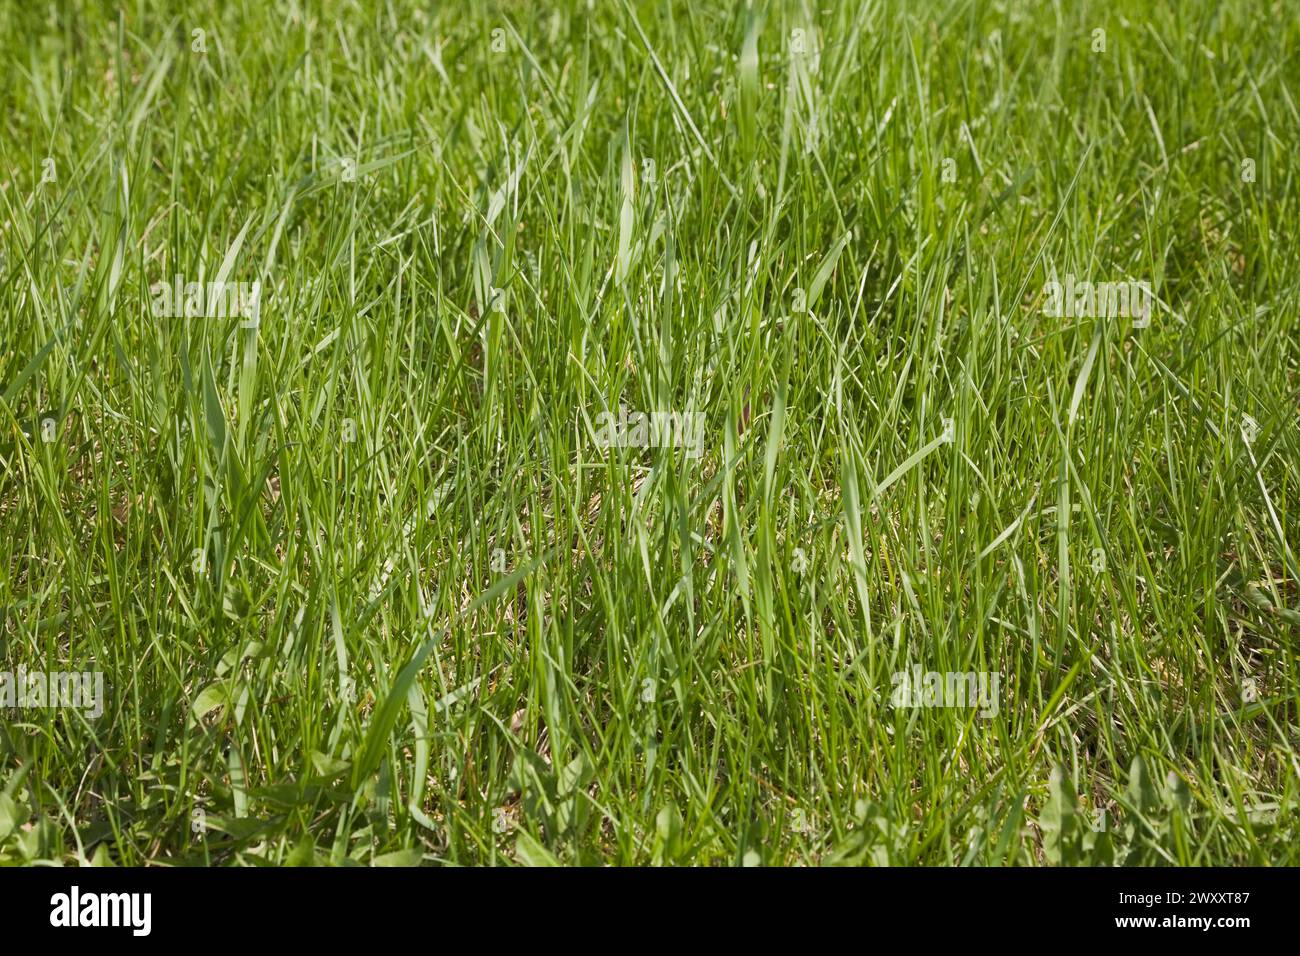 Close-up of neglected and in need of mowing Poa pratensis Kentucky bluegrass lawn in spring, Quebec, Canada Stock Photo